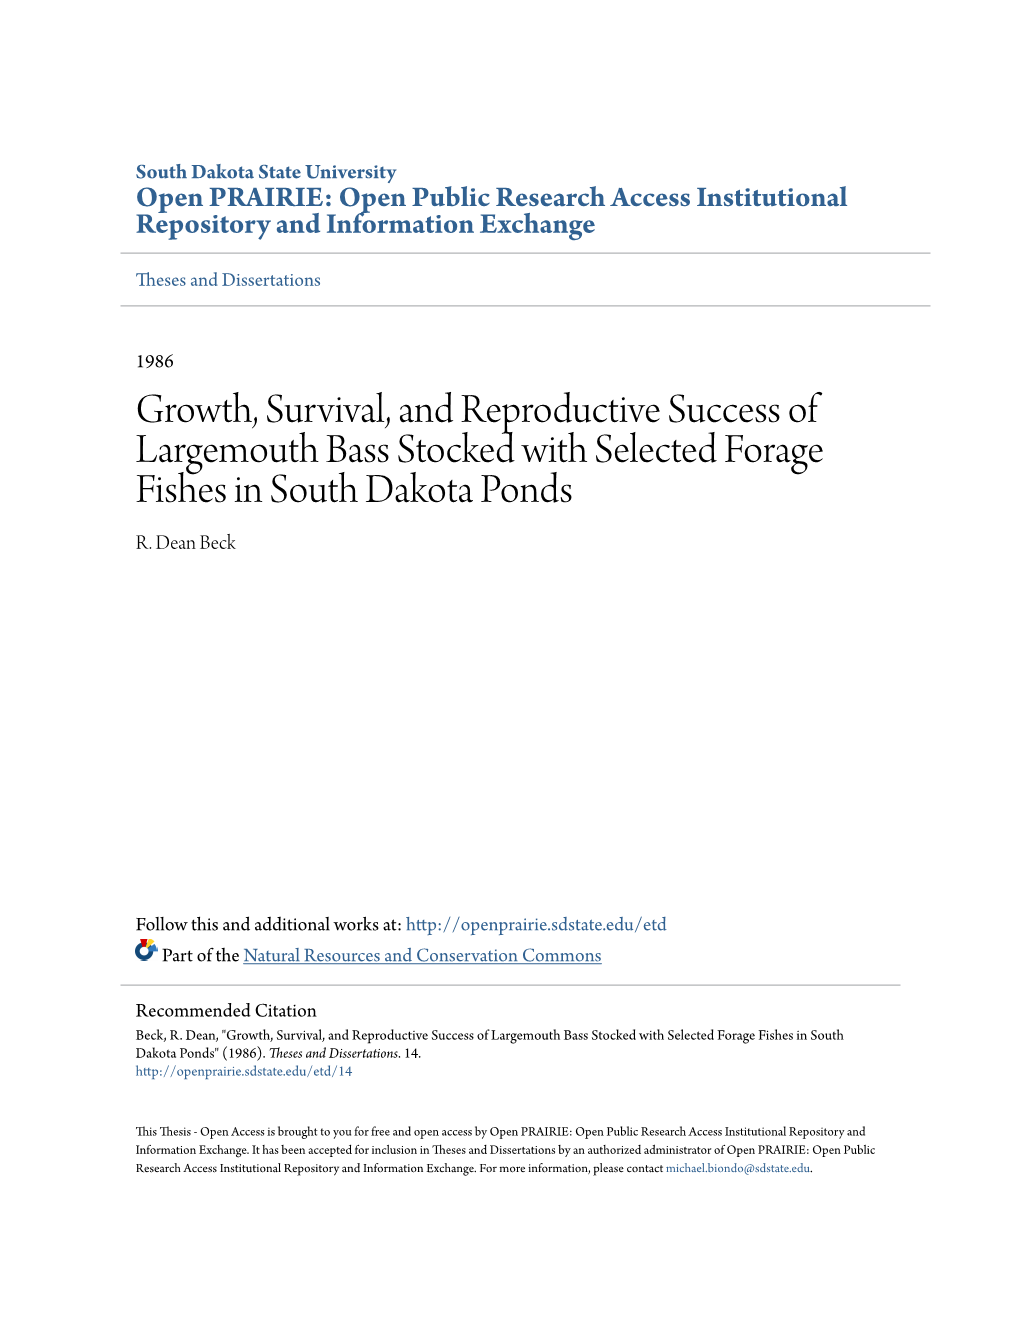 Growth, Survival, and Reproductive Success of Largemouth Bass Stocked with Selected Forage Fishes in South Dakota Ponds R